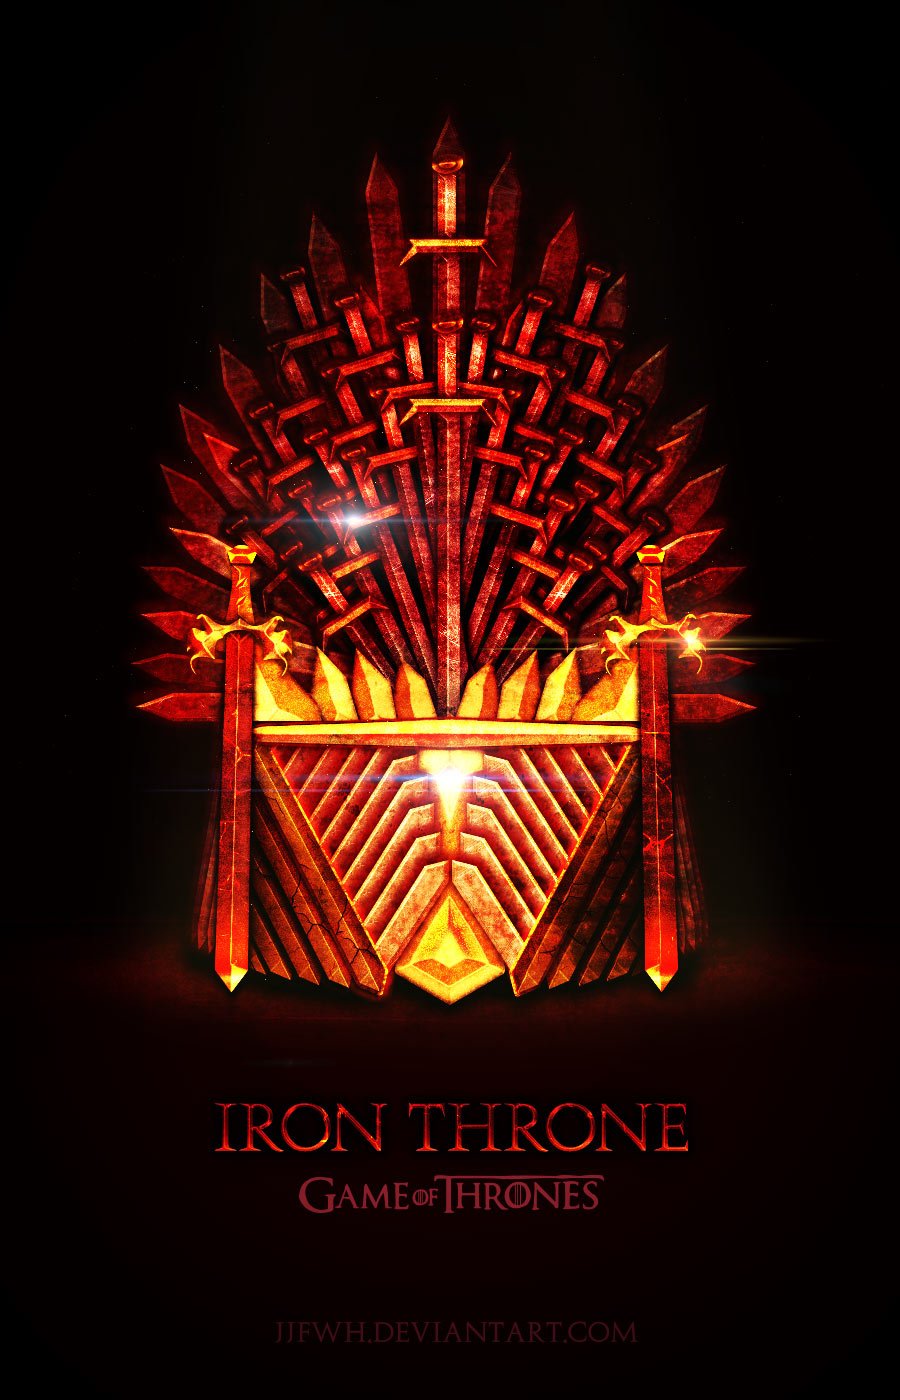 Who will grace the Iron Throne?